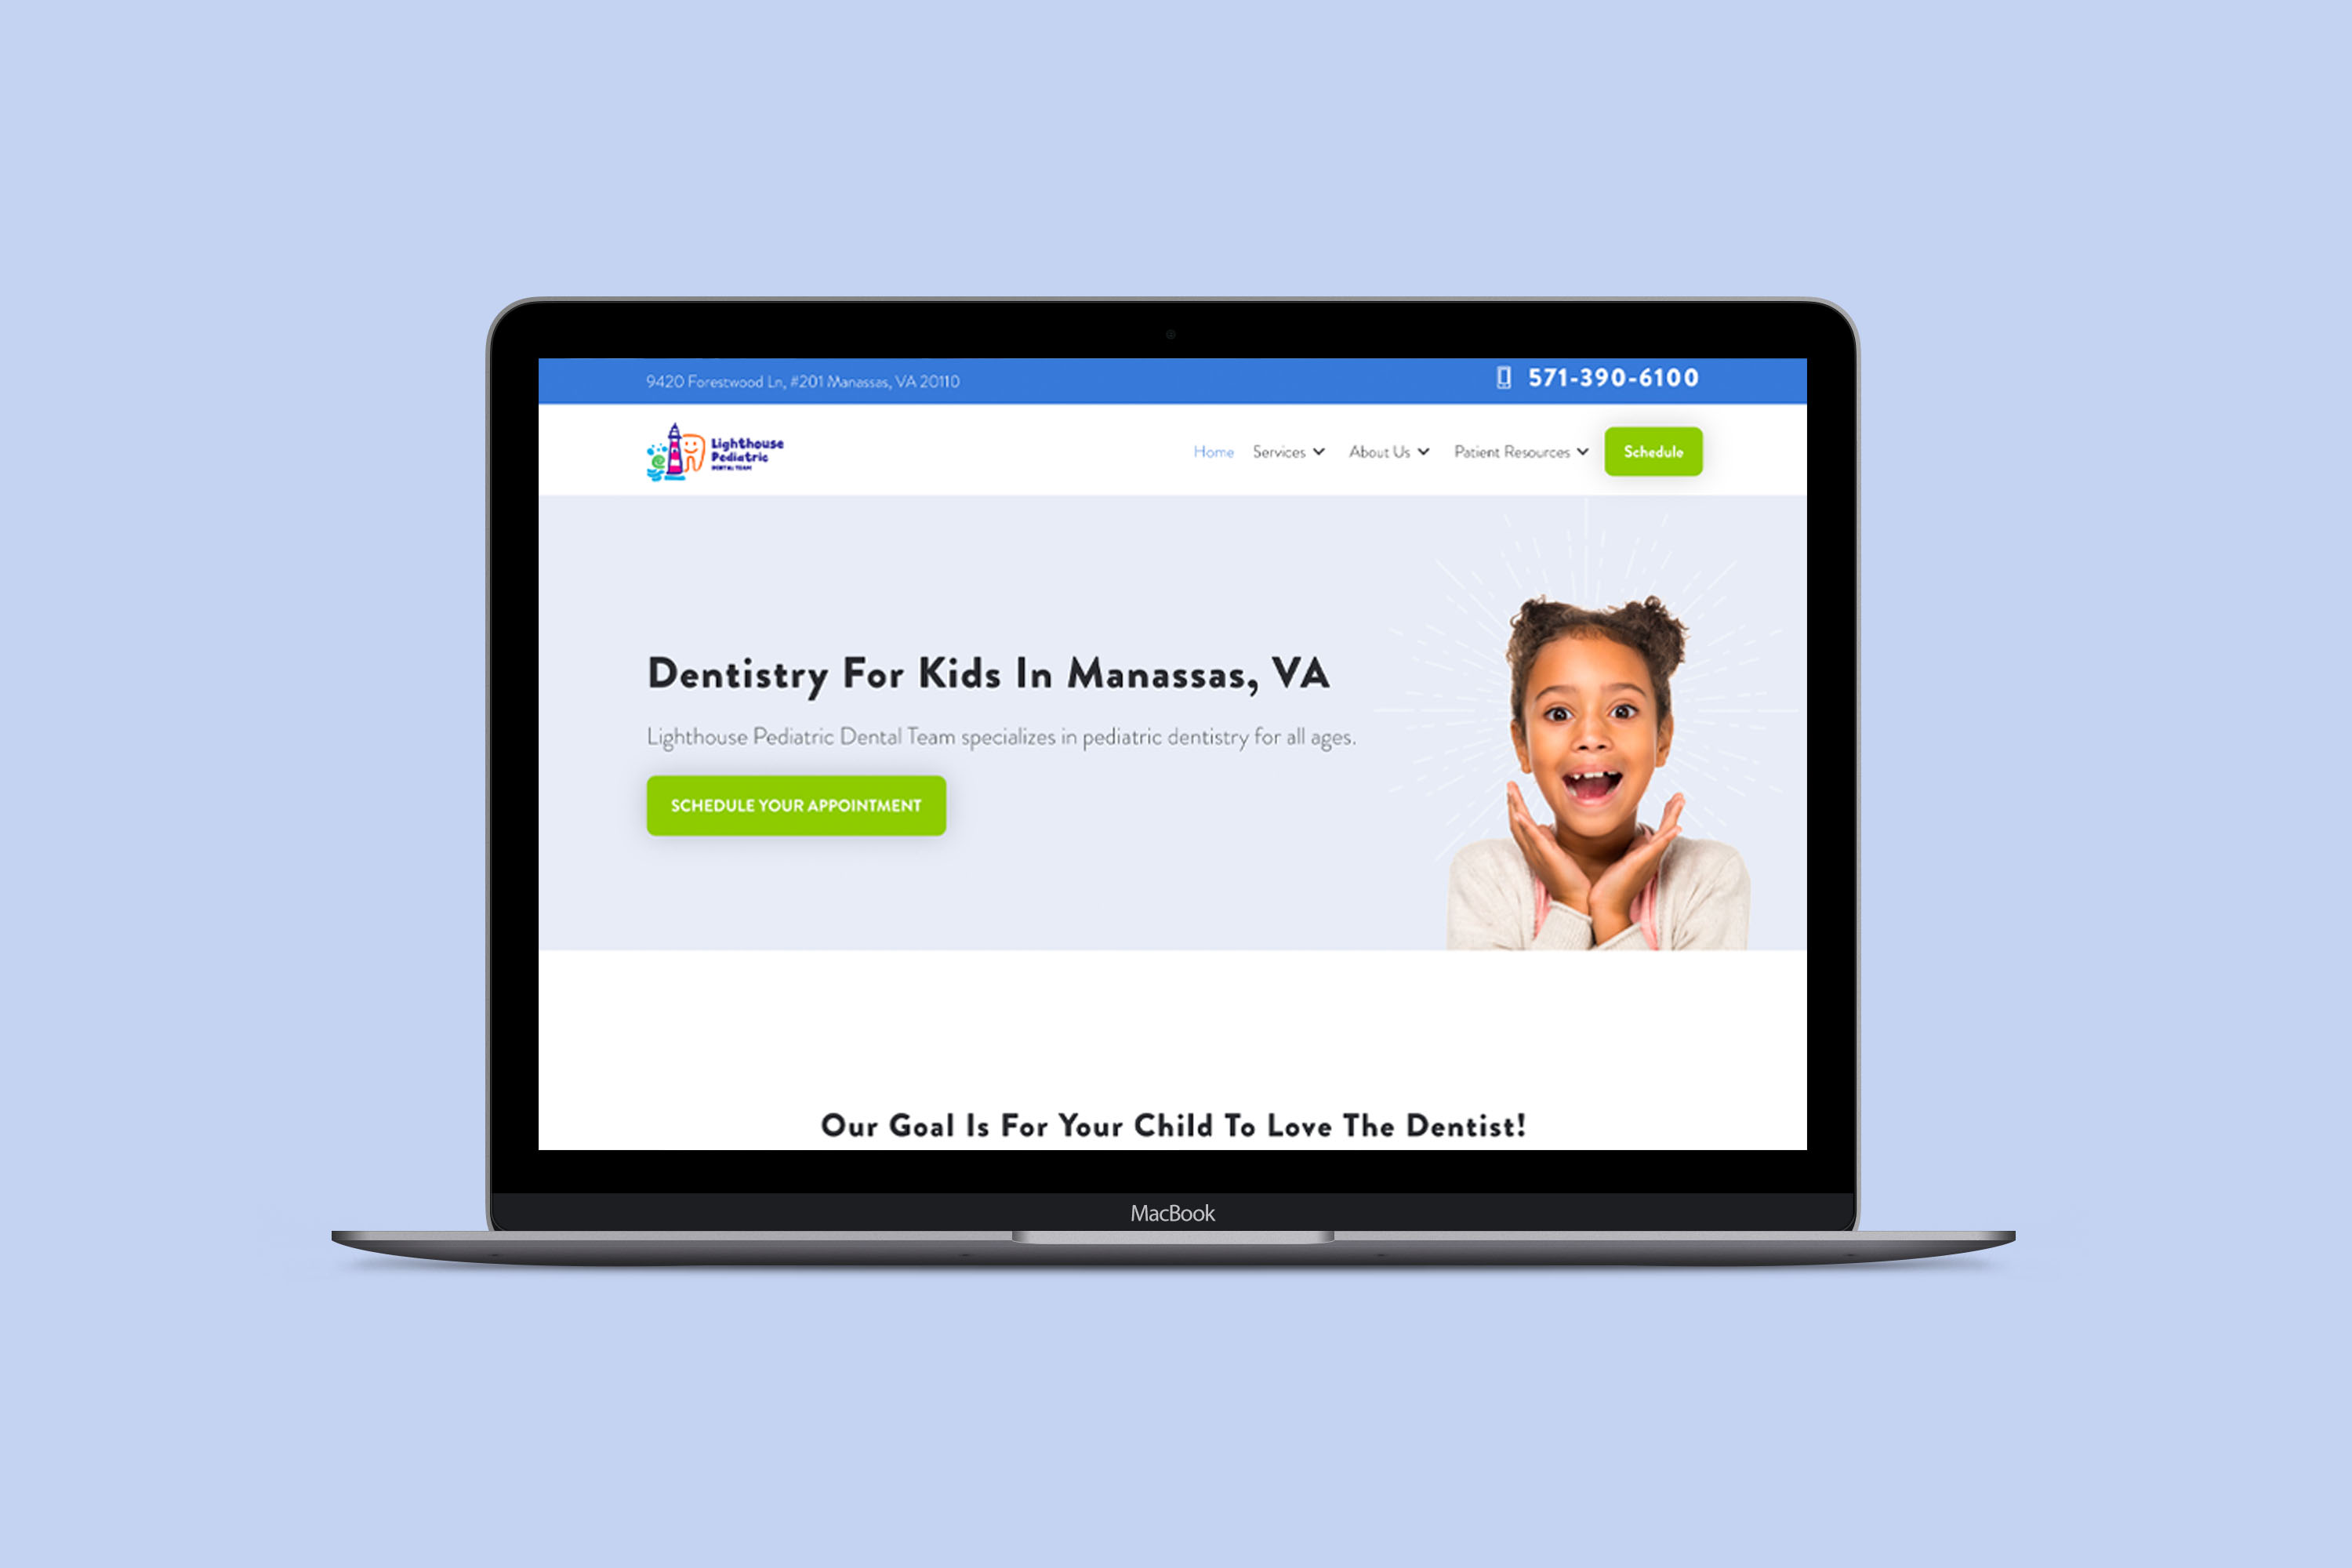 Screenshot within a Macbook Pro mock-up of the Lighthouse Pediatric Dental Team website